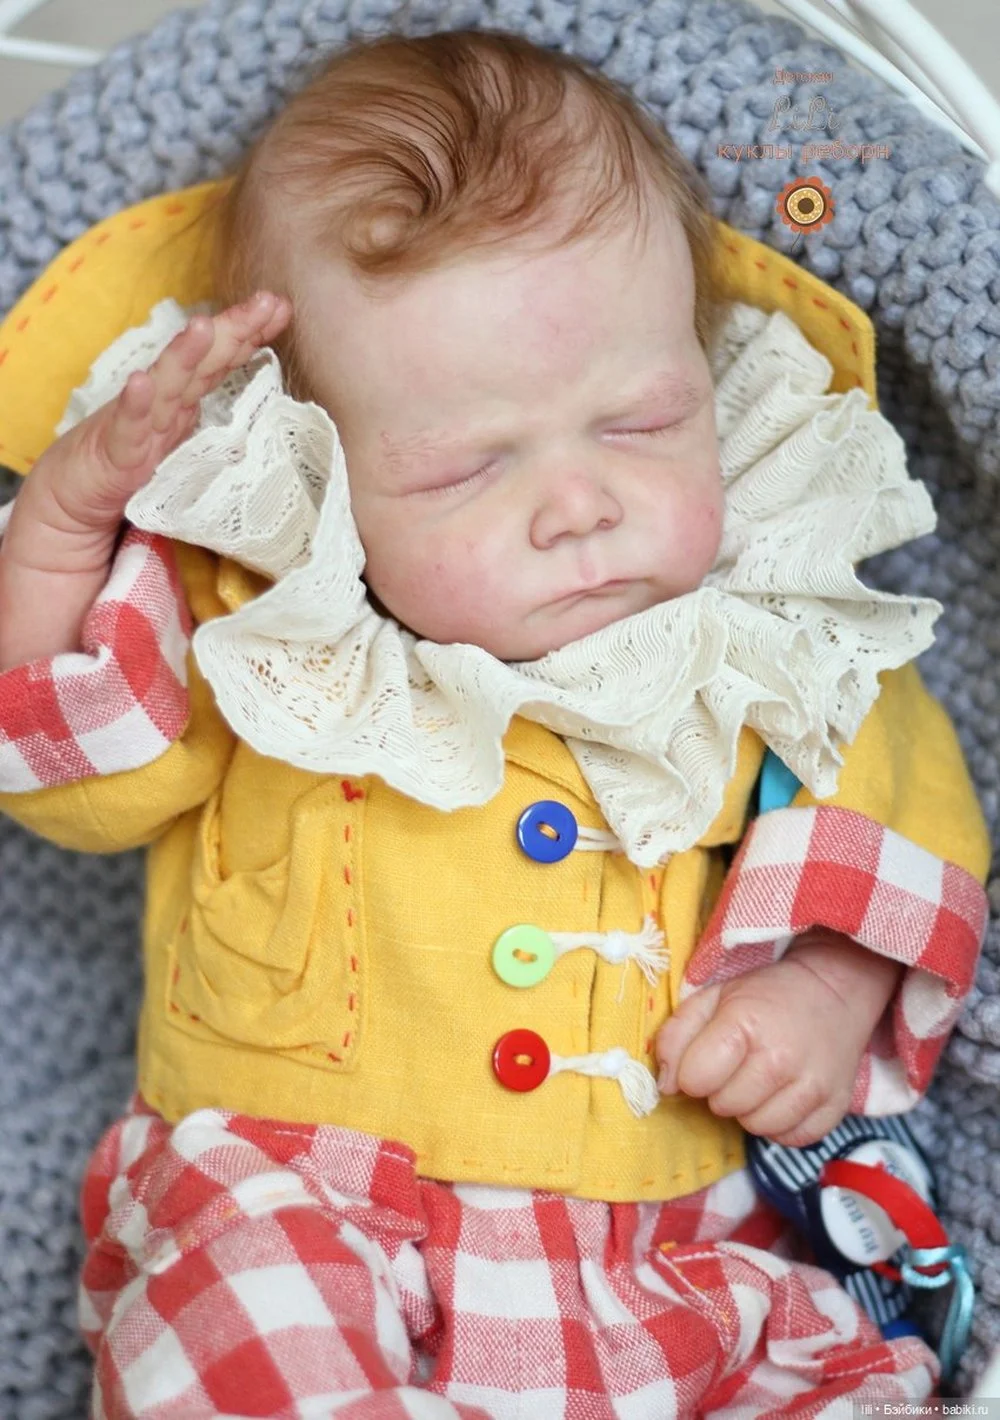 

19inch Reborn Doll Kit Cayle Lifelike Newborn Sleeping Baby Soft Touch Fresh Color Unfinished Unpainted Doll Parts with Body